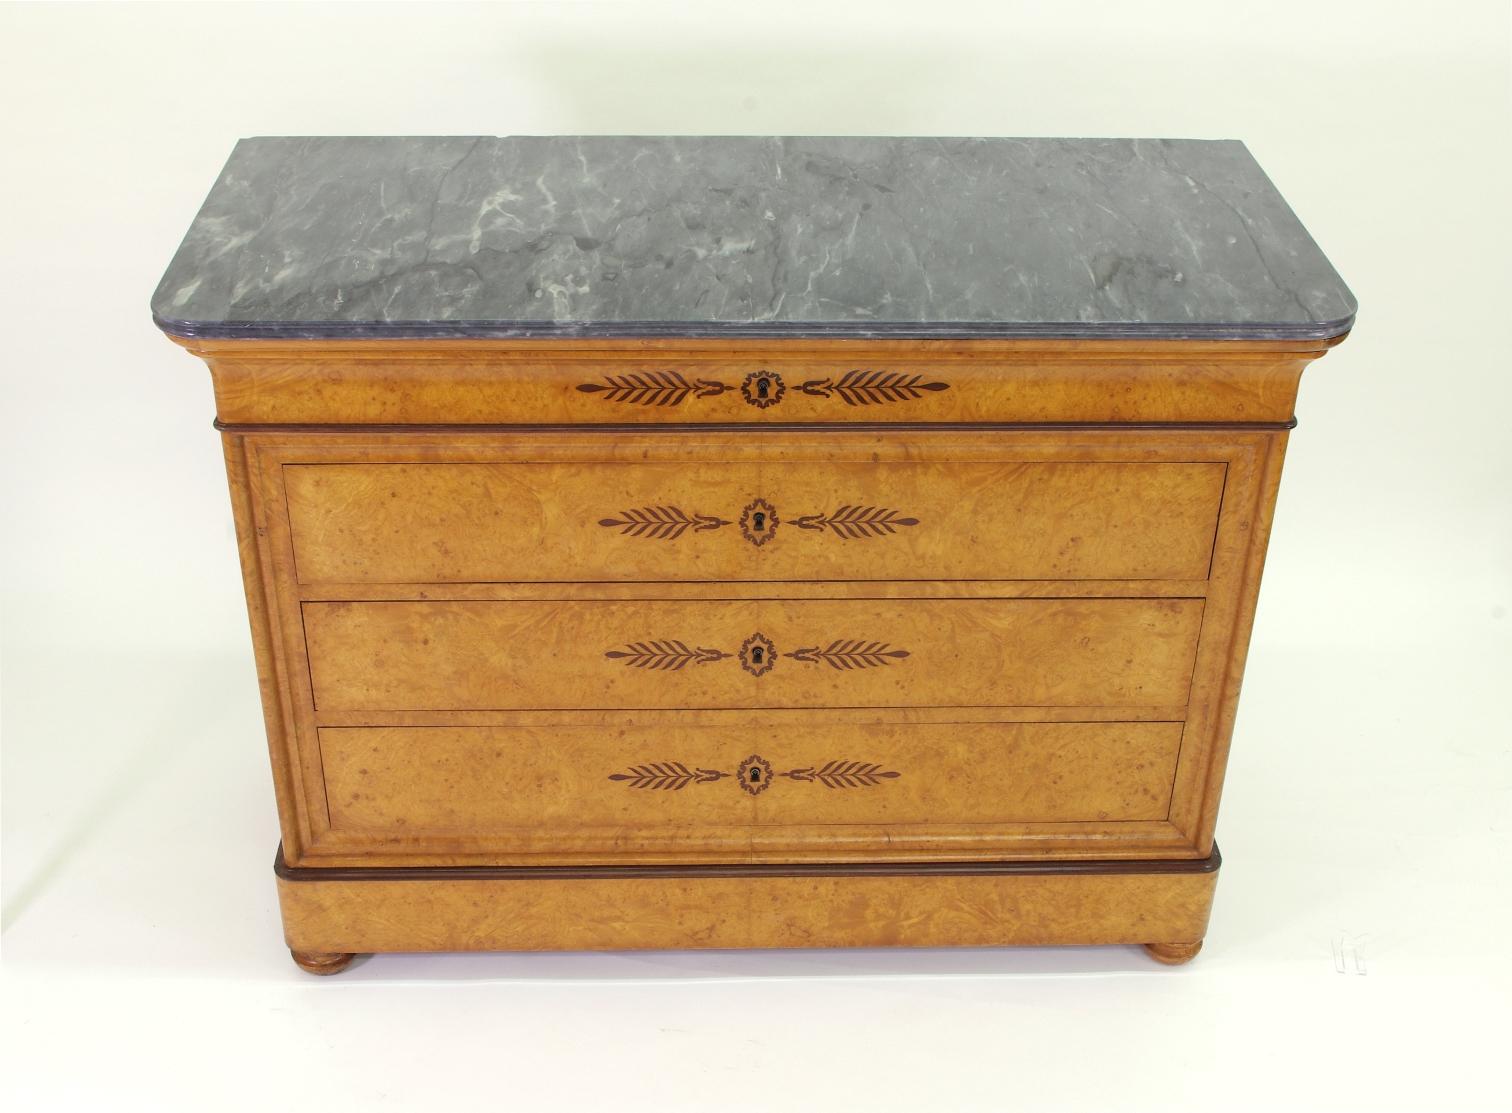 French restauration (Charles X) burl ash chest of drawers, the gray marble-top (Blue Turquin) over four long drawers, each with purple-heart inlay and a fine locking mechanism; the turned bun feet joined by a secret drawer.

This beautiful chest